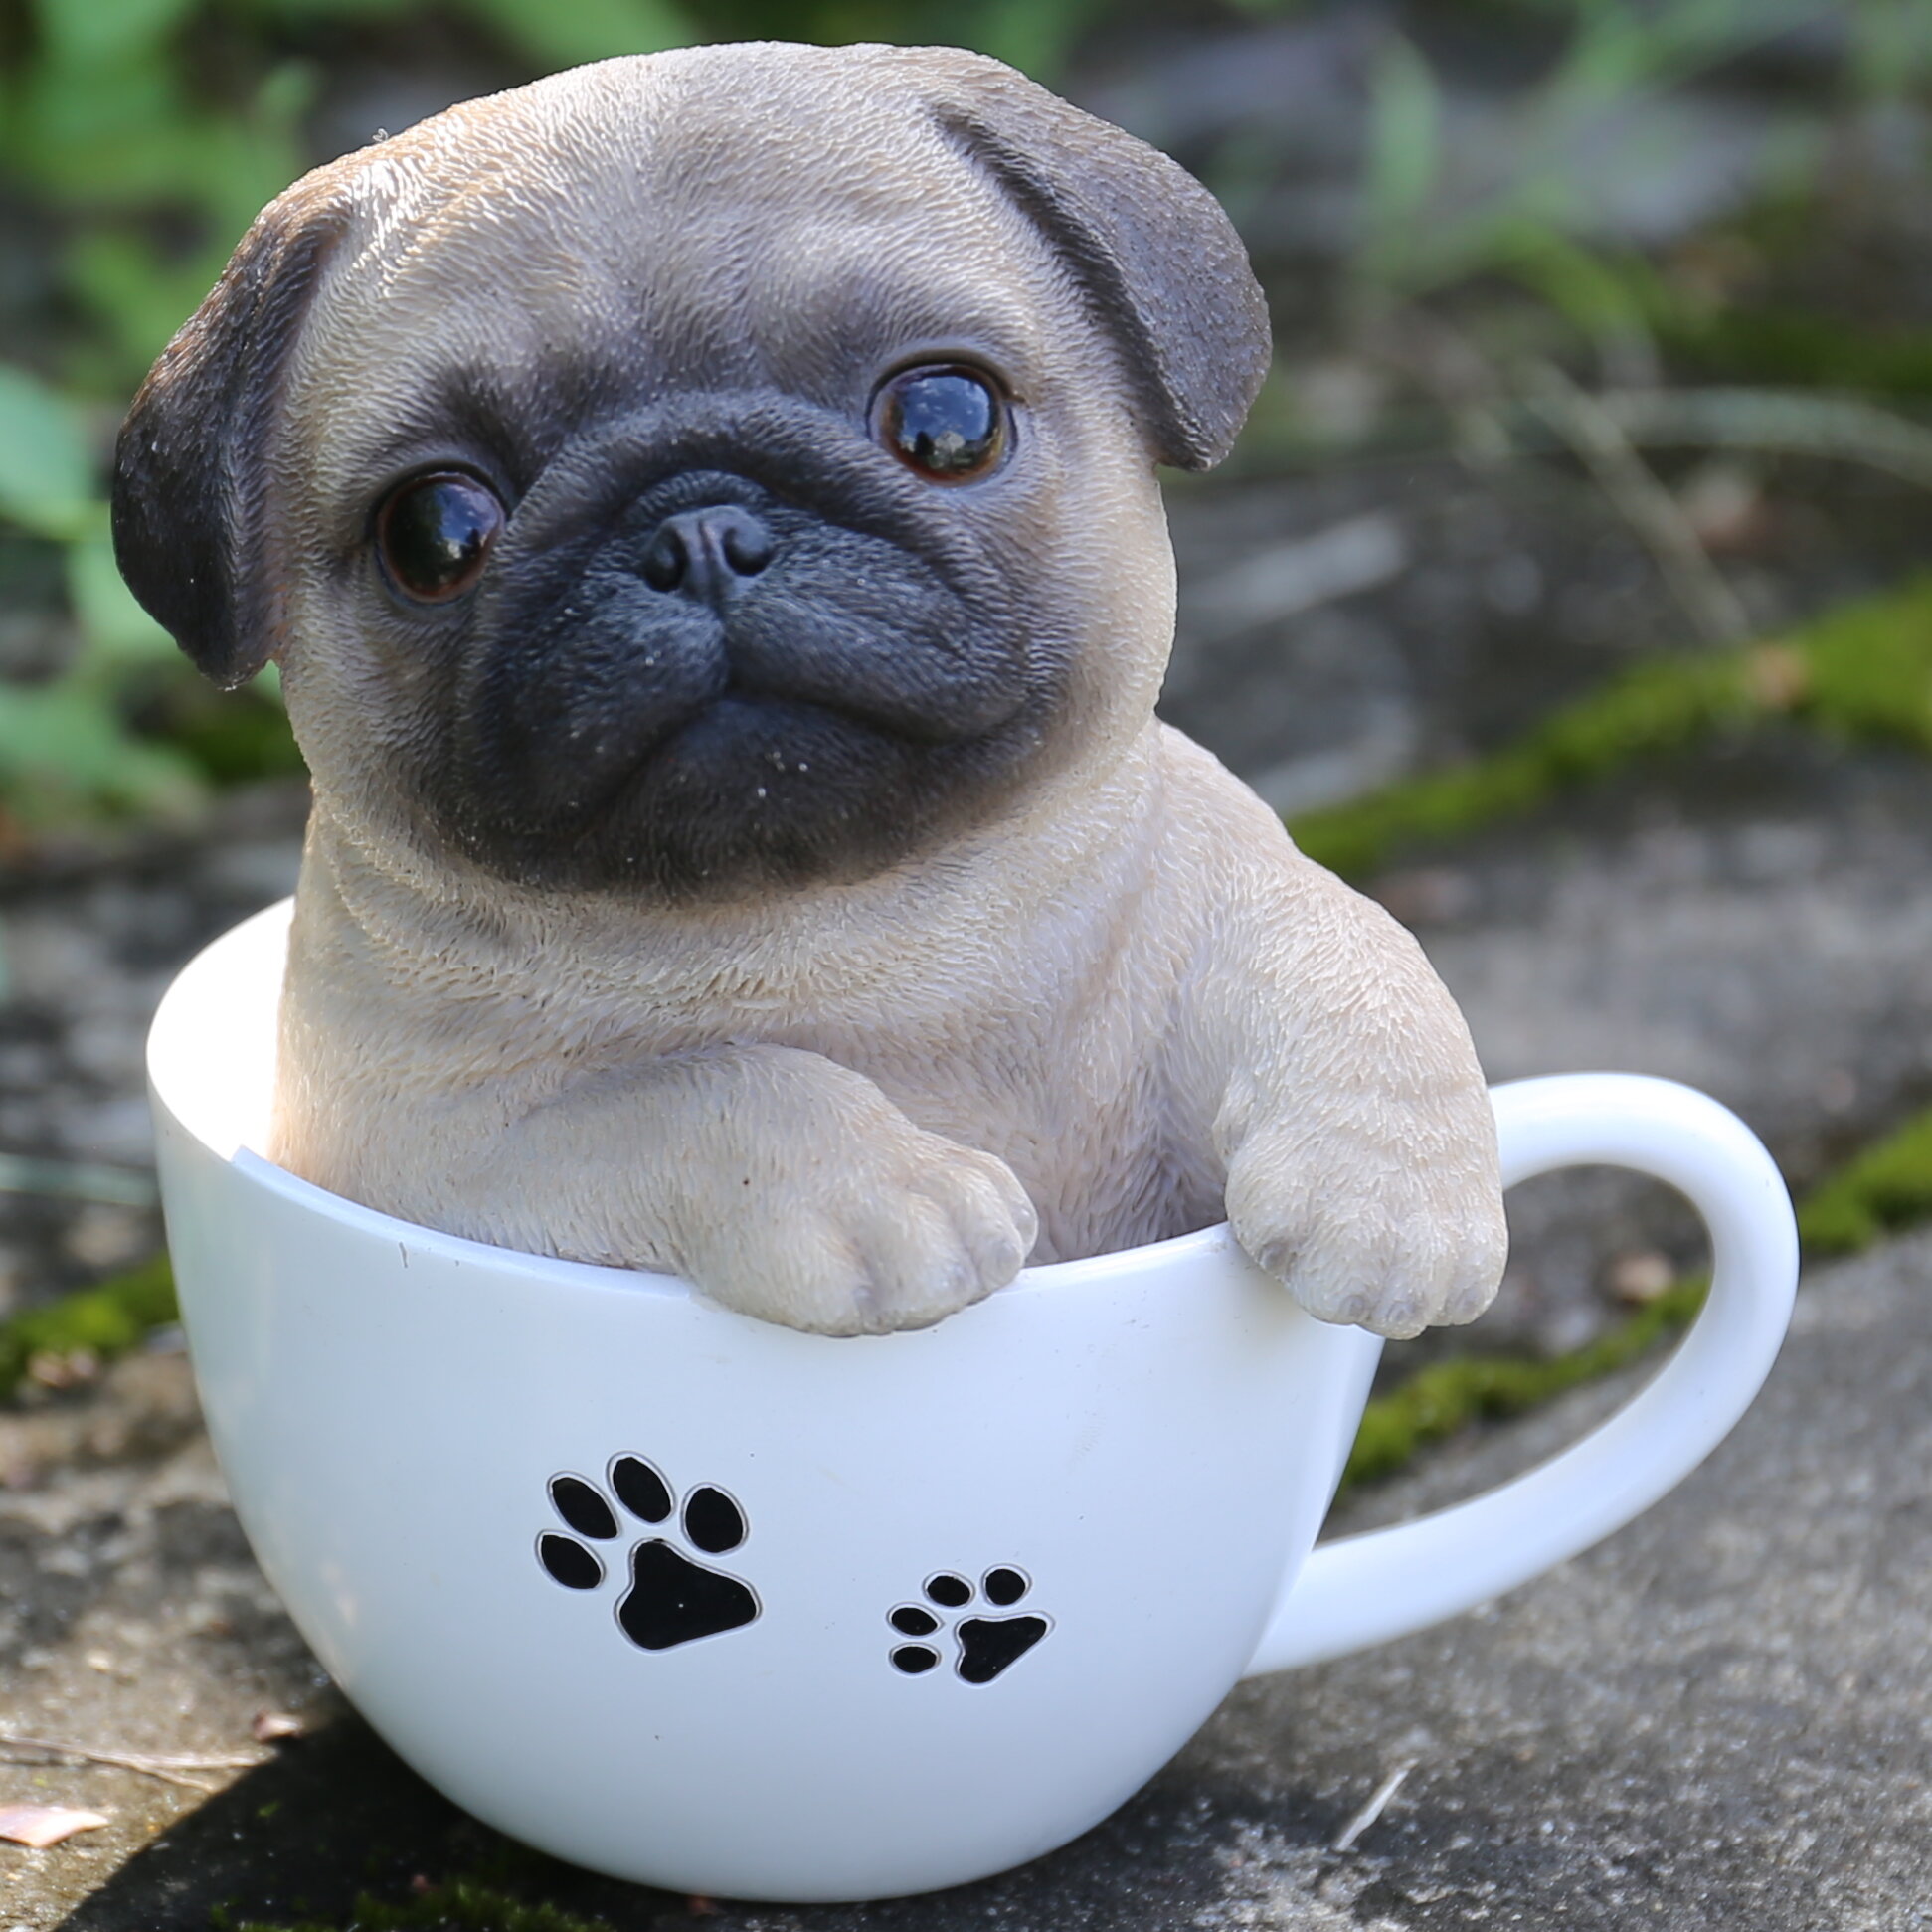 pugs that stay small